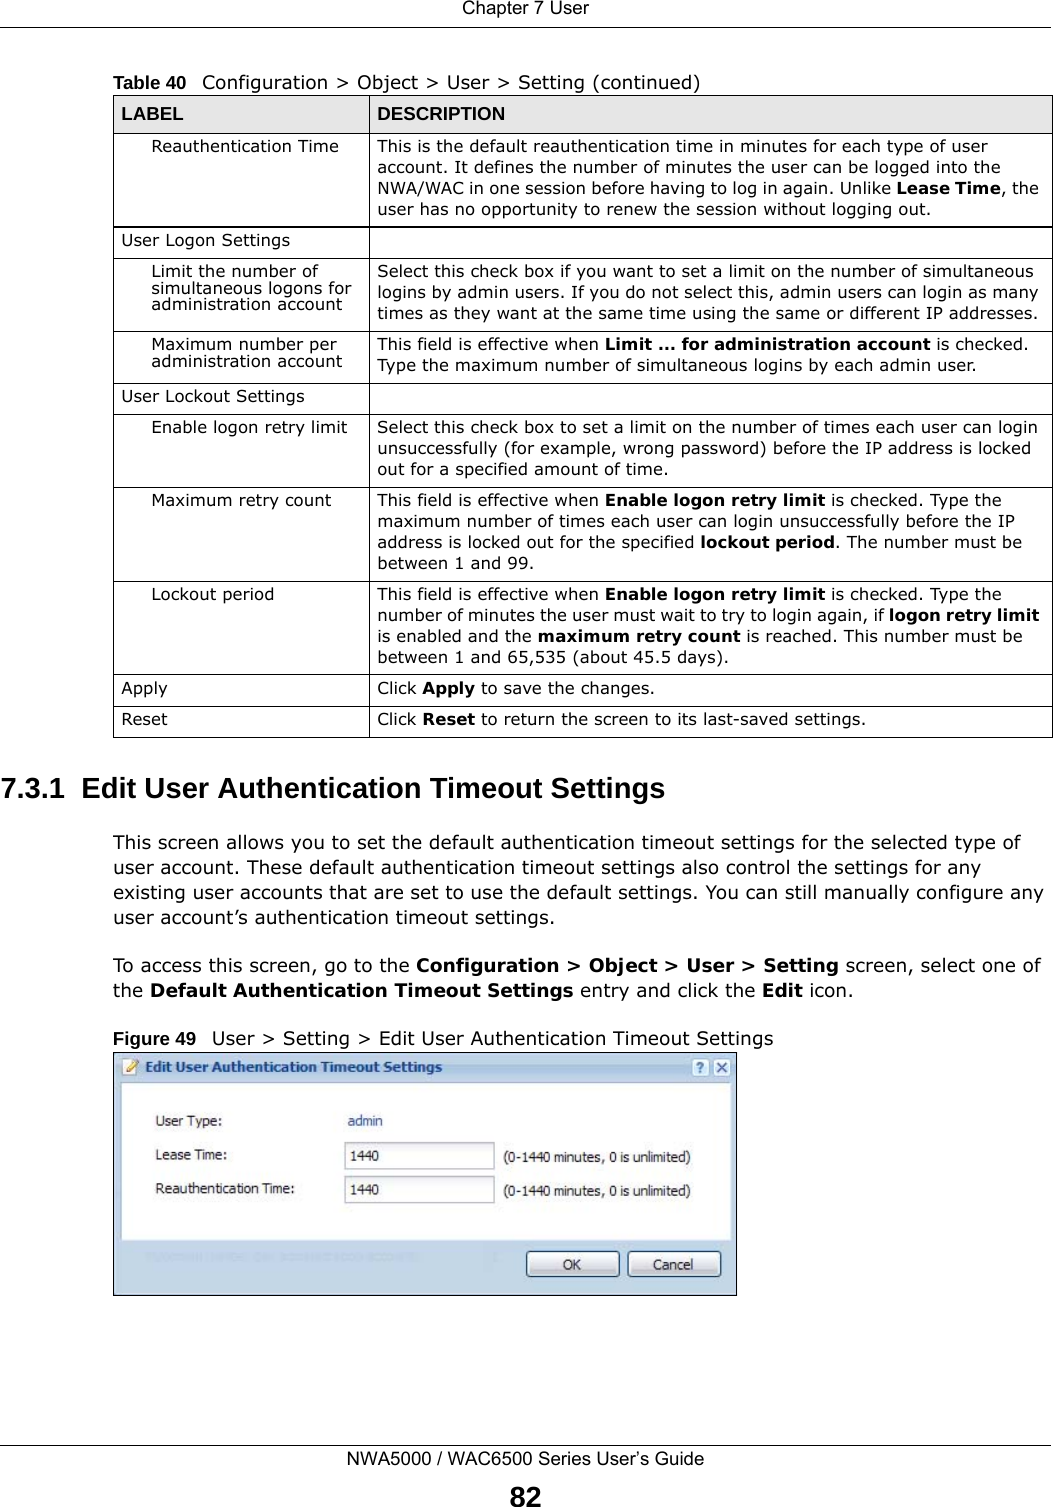 Chapter 7 UserNWA5000 / WAC6500 Series User’s Guide827.3.1  Edit User Authentication Timeout SettingsThis screen allows you to set the default authentication timeout settings for the selected type of user account. These default authentication timeout settings also control the settings for any existing user accounts that are set to use the default settings. You can still manually configure any user account’s authentication timeout settings.To access this screen, go to the Configuration &gt; Object &gt; User &gt; Setting screen, select one of the Default Authentication Timeout Settings entry and click the Edit icon.Figure 49   User &gt; Setting &gt; Edit User Authentication Timeout SettingsReauthentication Time This is the default reauthentication time in minutes for each type of user account. It defines the number of minutes the user can be logged into the NWA/WAC in one session before having to log in again. Unlike Lease Time, the user has no opportunity to renew the session without logging out.User Logon SettingsLimit the number of simultaneous logons for administration accountSelect this check box if you want to set a limit on the number of simultaneous logins by admin users. If you do not select this, admin users can login as many times as they want at the same time using the same or different IP addresses.Maximum number per administration account This field is effective when Limit ... for administration account is checked. Type the maximum number of simultaneous logins by each admin user. User Lockout SettingsEnable logon retry limit Select this check box to set a limit on the number of times each user can login unsuccessfully (for example, wrong password) before the IP address is locked out for a specified amount of time.Maximum retry count This field is effective when Enable logon retry limit is checked. Type the maximum number of times each user can login unsuccessfully before the IP address is locked out for the specified lockout period. The number must be between 1 and 99.Lockout period This field is effective when Enable logon retry limit is checked. Type the number of minutes the user must wait to try to login again, if logon retry limit is enabled and the maximum retry count is reached. This number must be between 1 and 65,535 (about 45.5 days).Apply Click Apply to save the changes. Reset Click Reset to return the screen to its last-saved settings. Table 40   Configuration &gt; Object &gt; User &gt; Setting (continued)LABEL DESCRIPTION